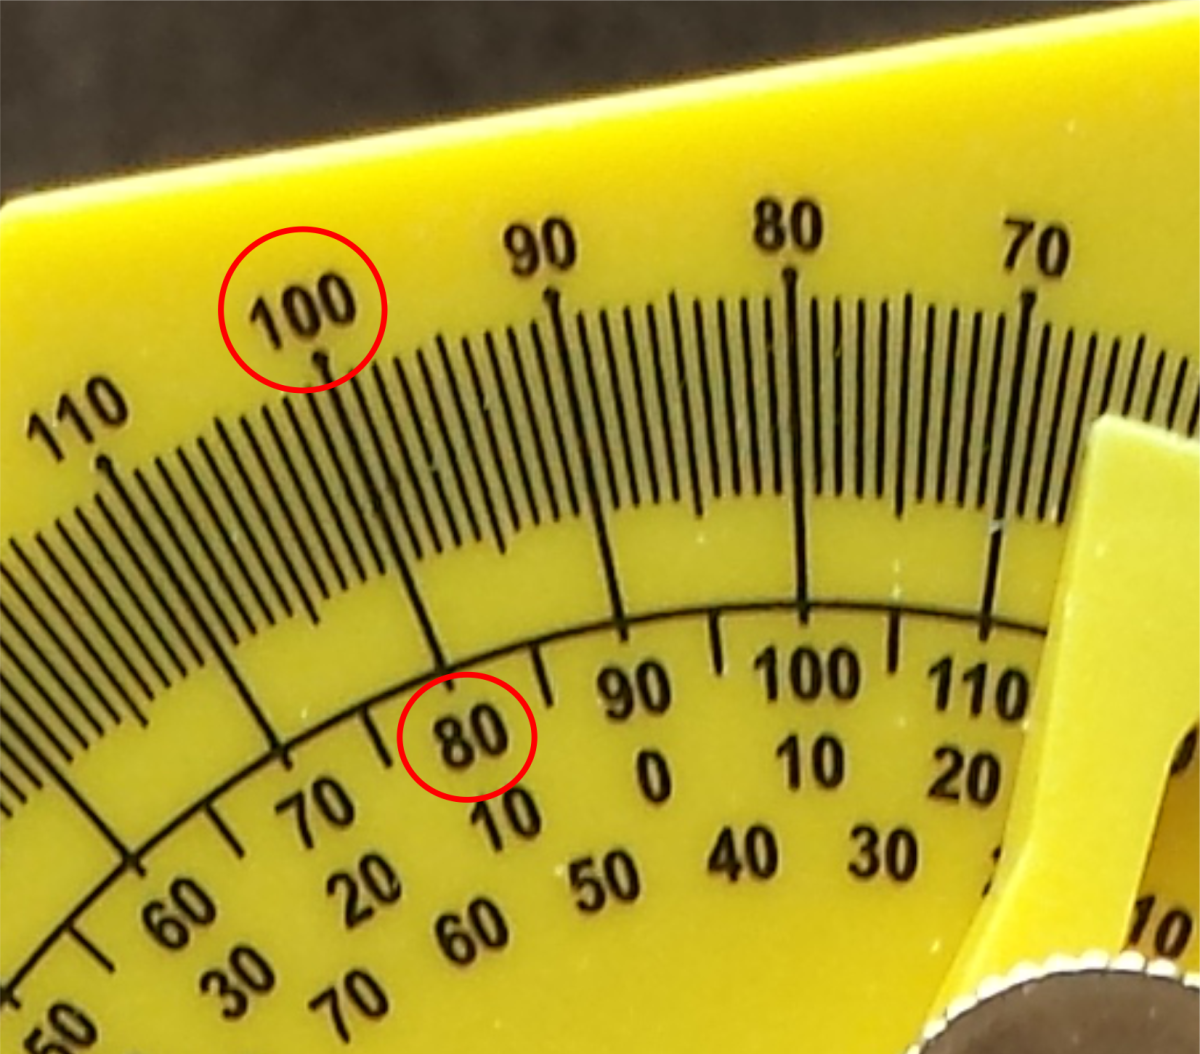 Working with a miter saw—if you have an angle measuring 100°, its corresponding number is 80° on the protractor. Divide that by 2, and you get 40°. So you place your miter saw’s number at 40°.